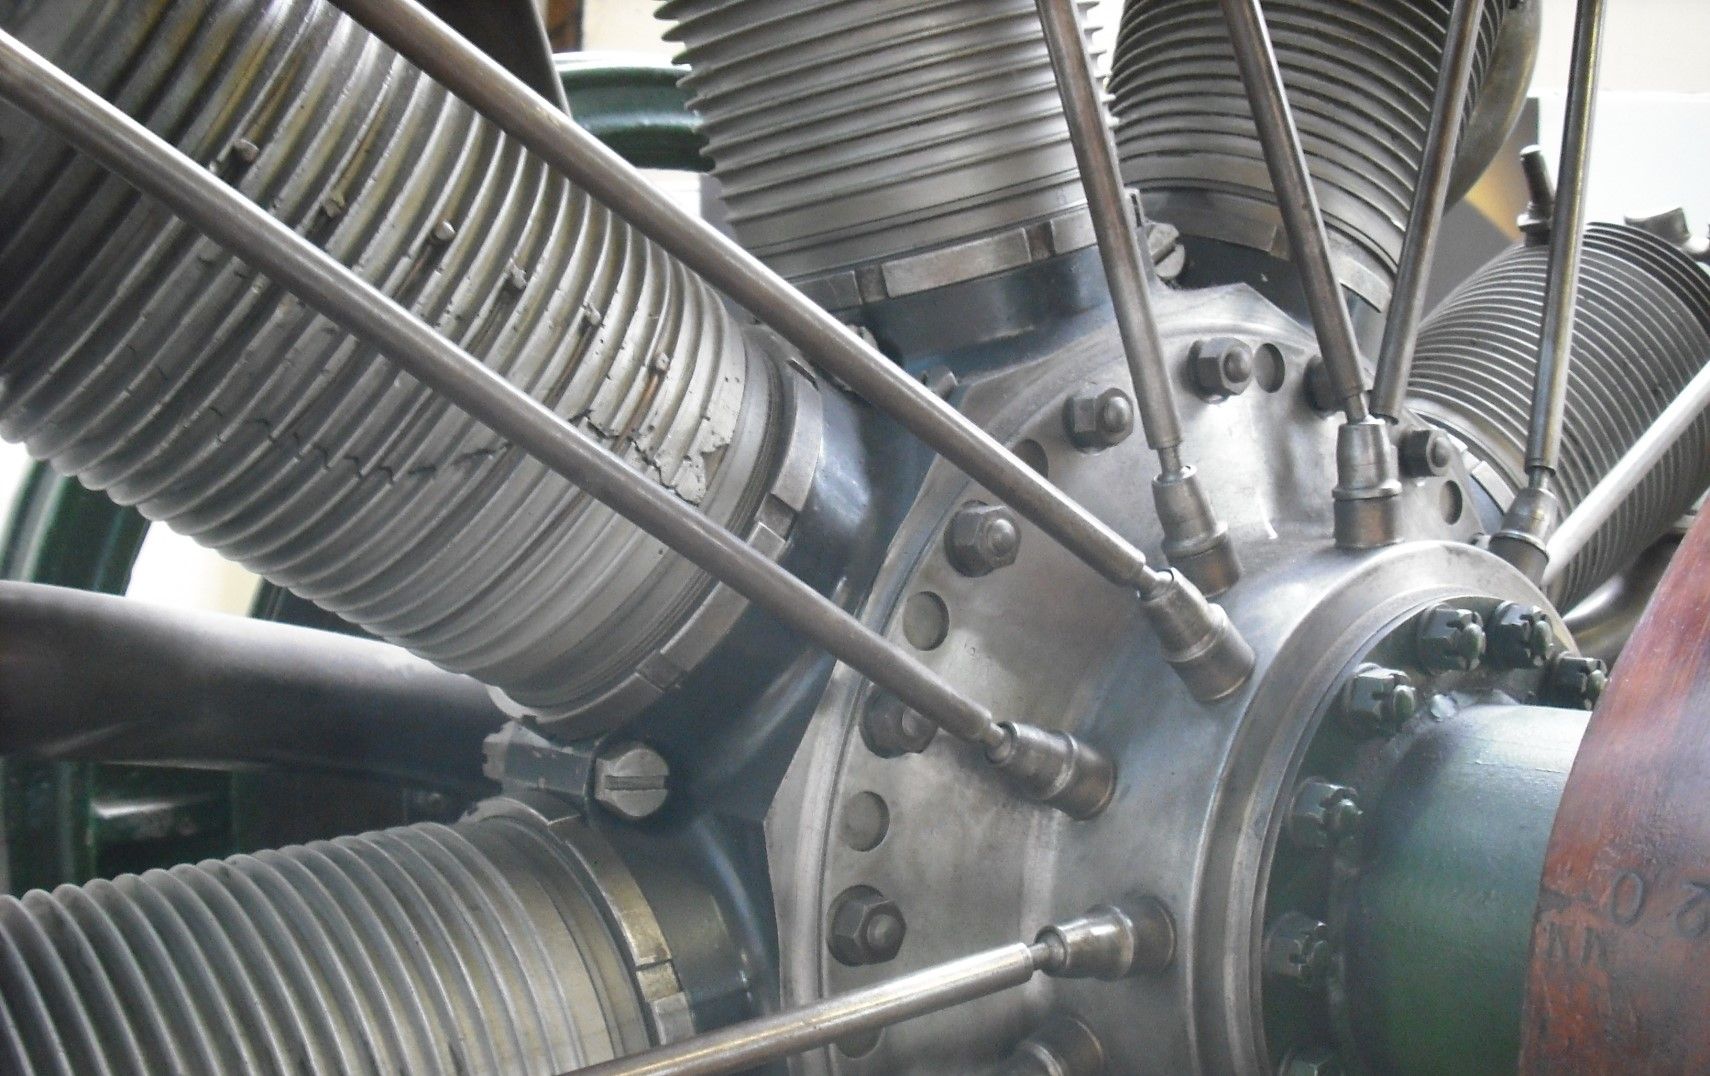 A Clerget 9 aviation engine with pushrods